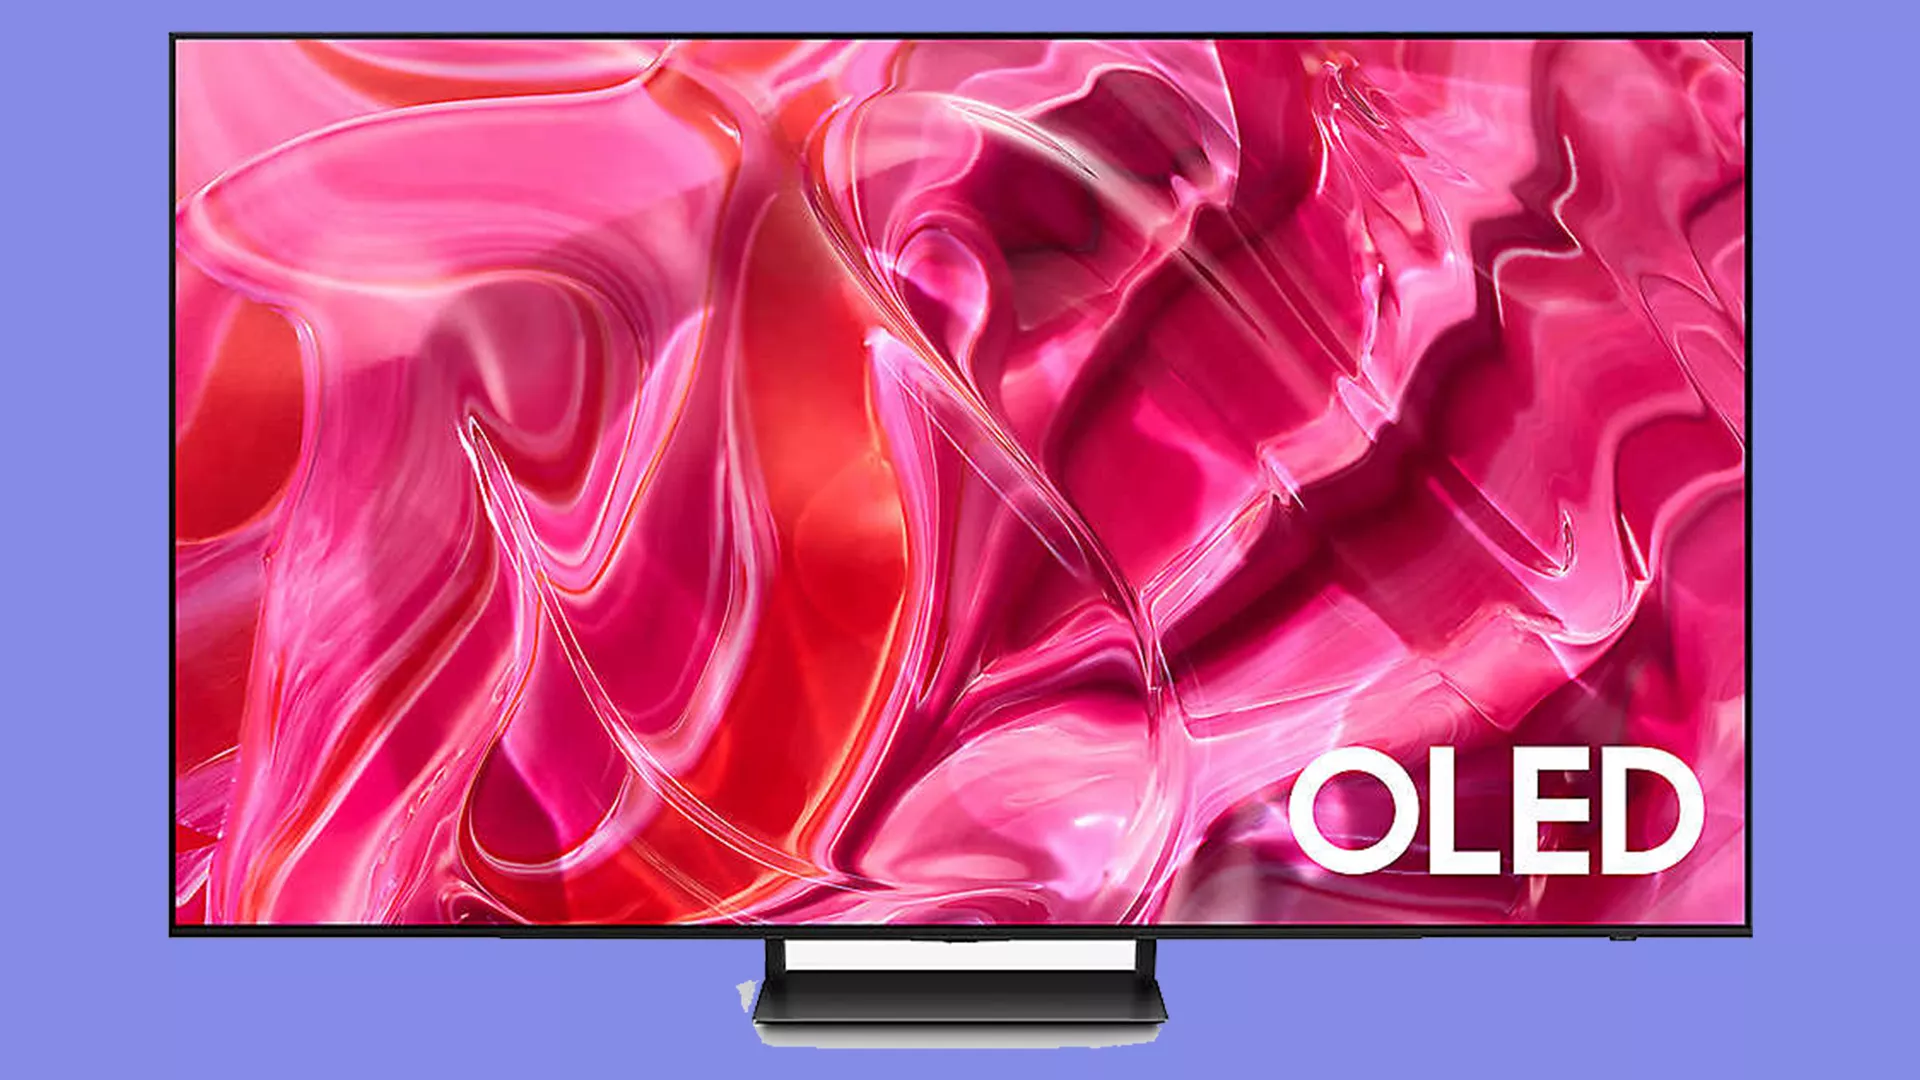 A Revolutionary Samsung 83-Inch Oled Tv Showcasing Its Immersive Visuals And Cutting-Edge Design.